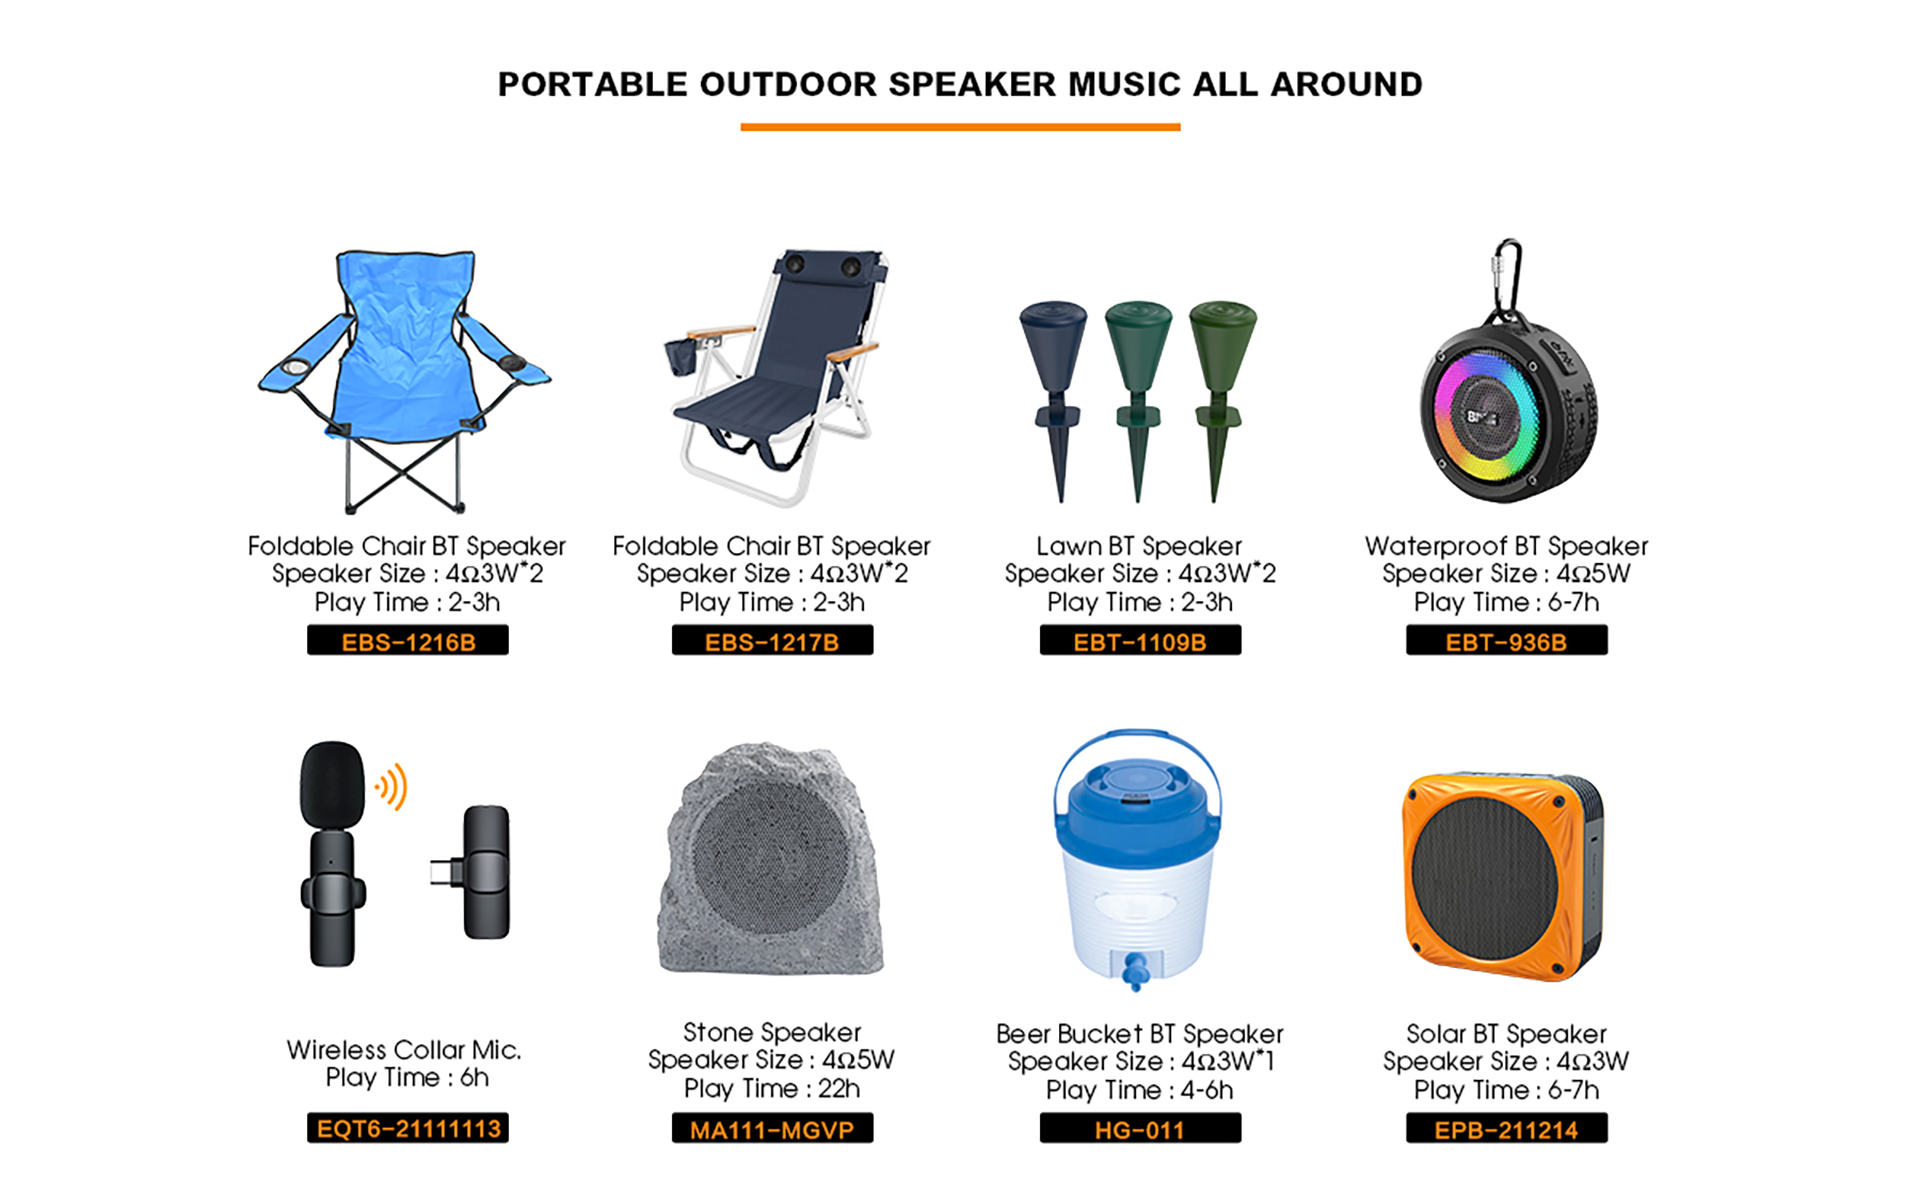 outdoor products catalog for bluetooth speaker with foldable chair, lawn, waterproof RGB light, stone mold, beer bucket, solar power. Wireless collar microphone